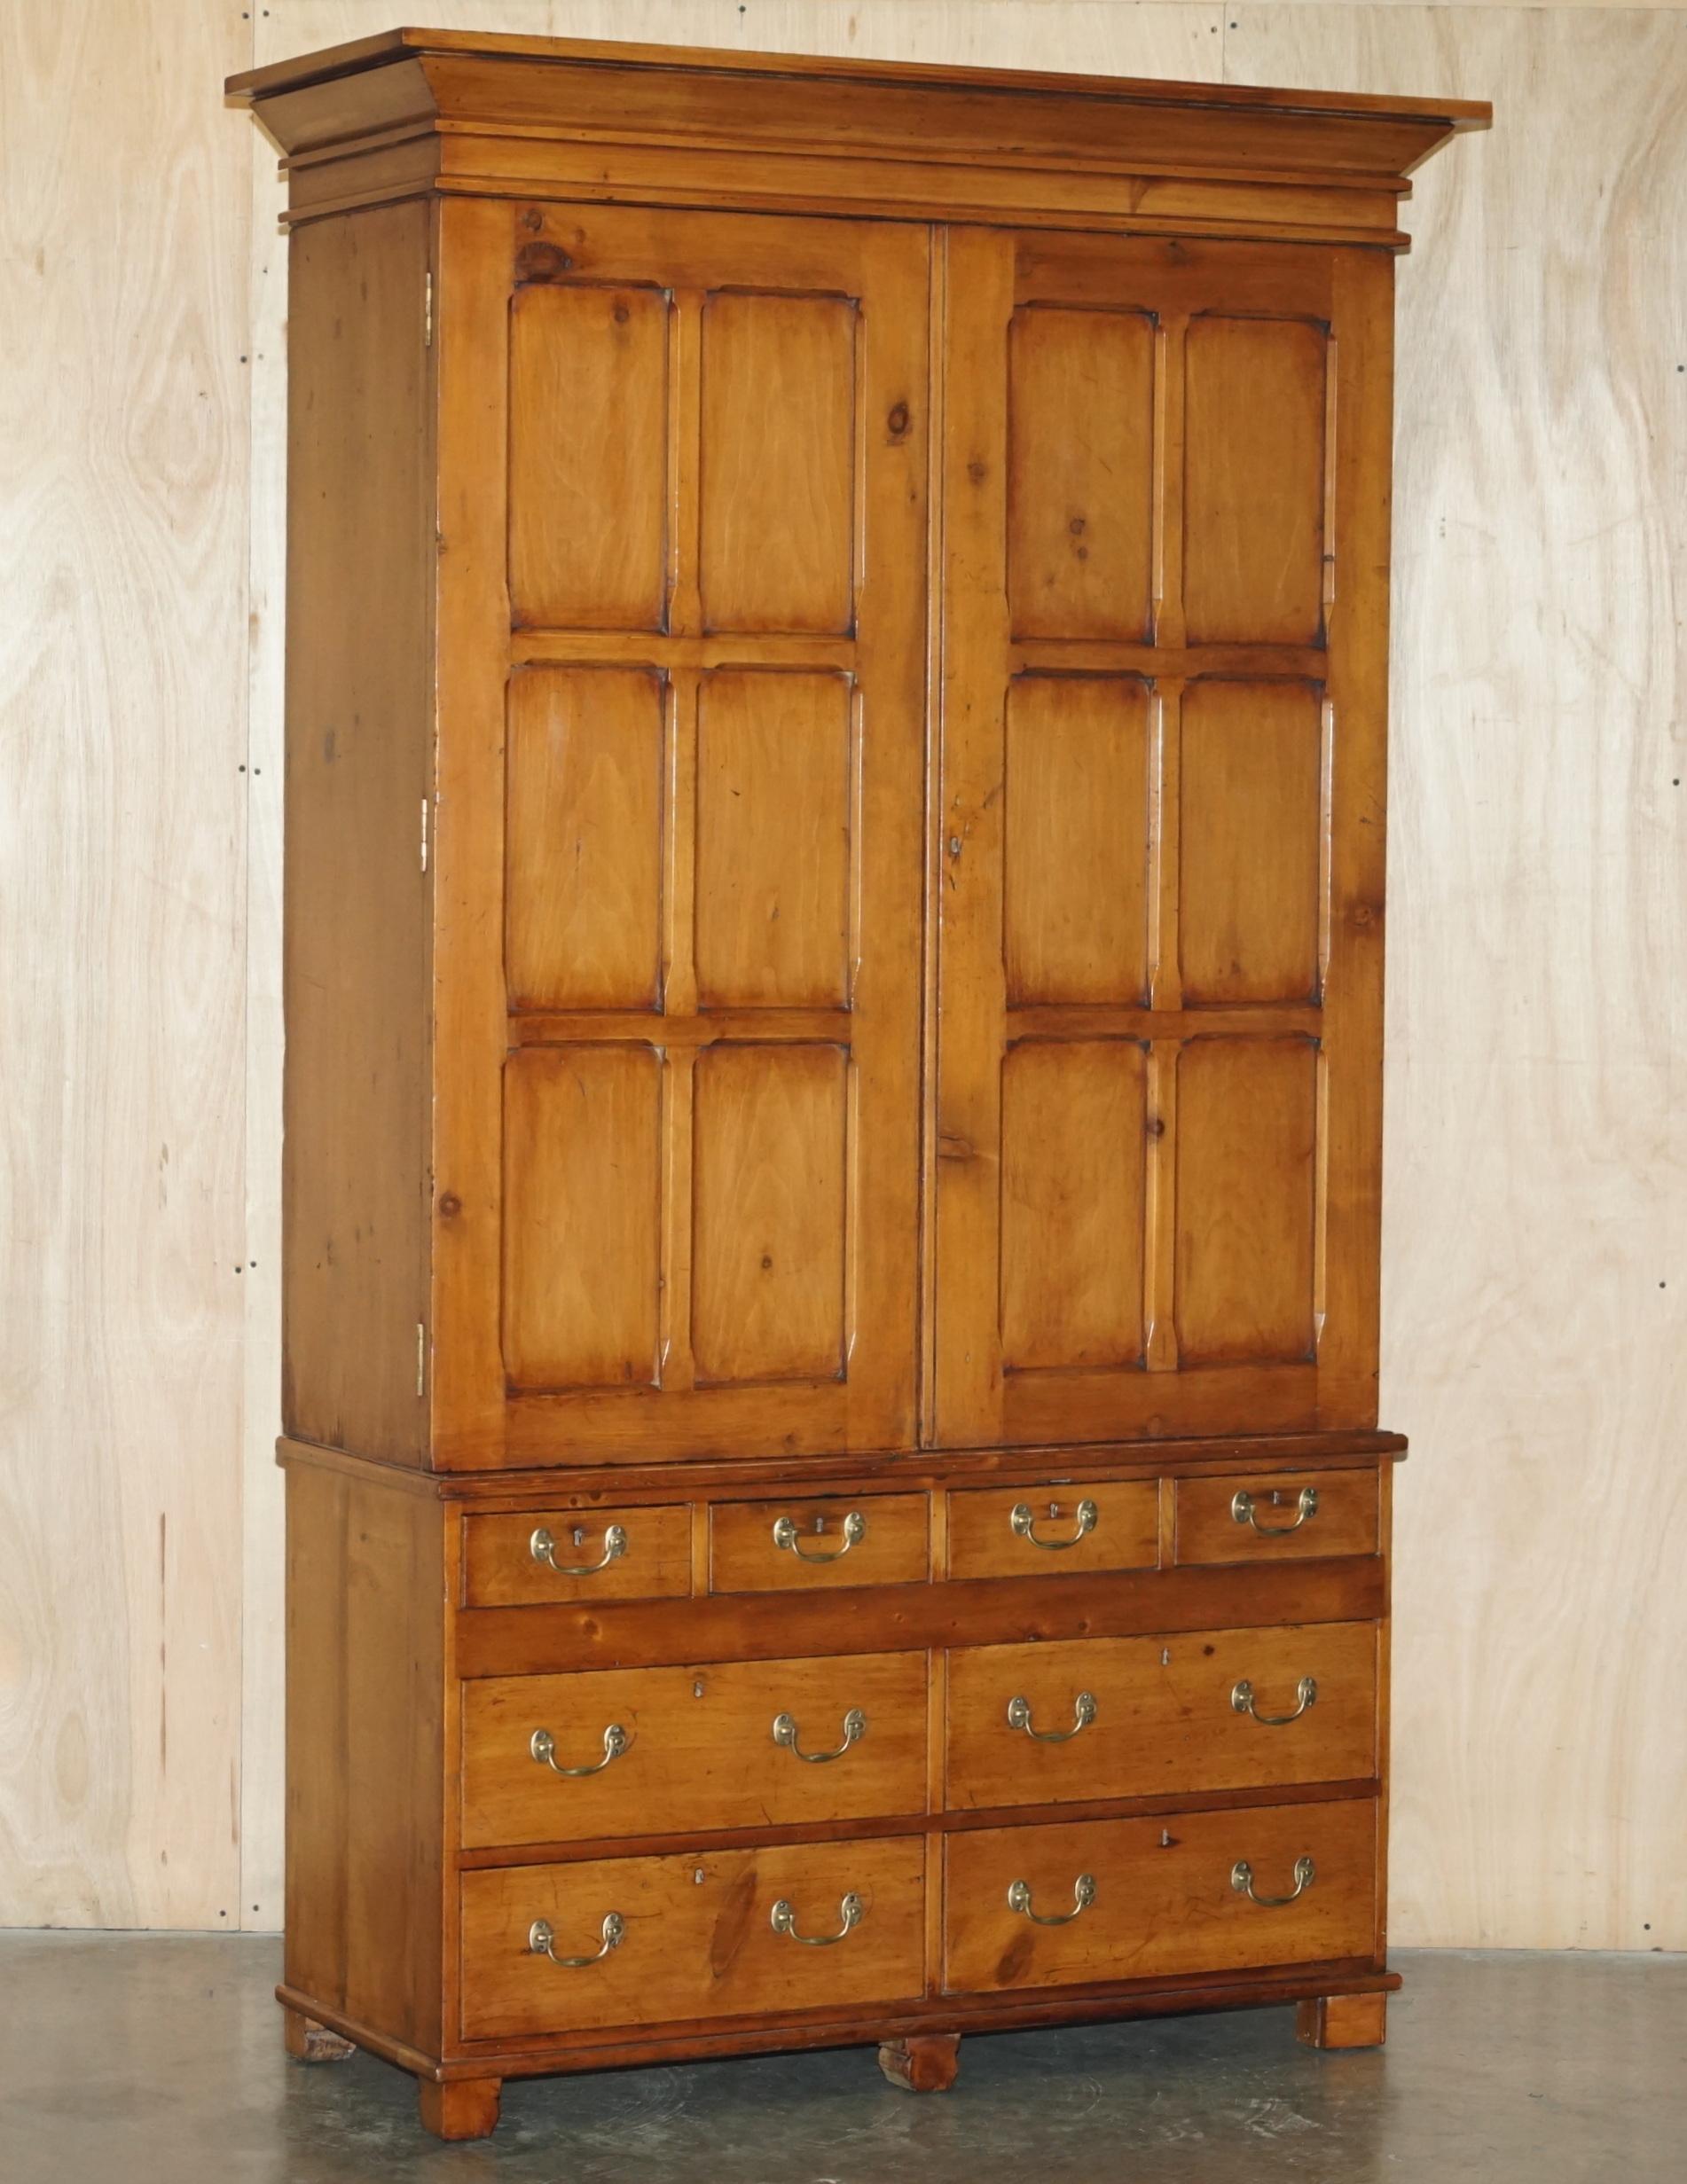 Royal House Antiques

Royal House Antiques is delighted to offer for sale this super rare, highly collectable Victorian Fruitwood, fully restored Gun collectors cabinet with steel roller ammunition drawers

Please note the delivery fee listed is